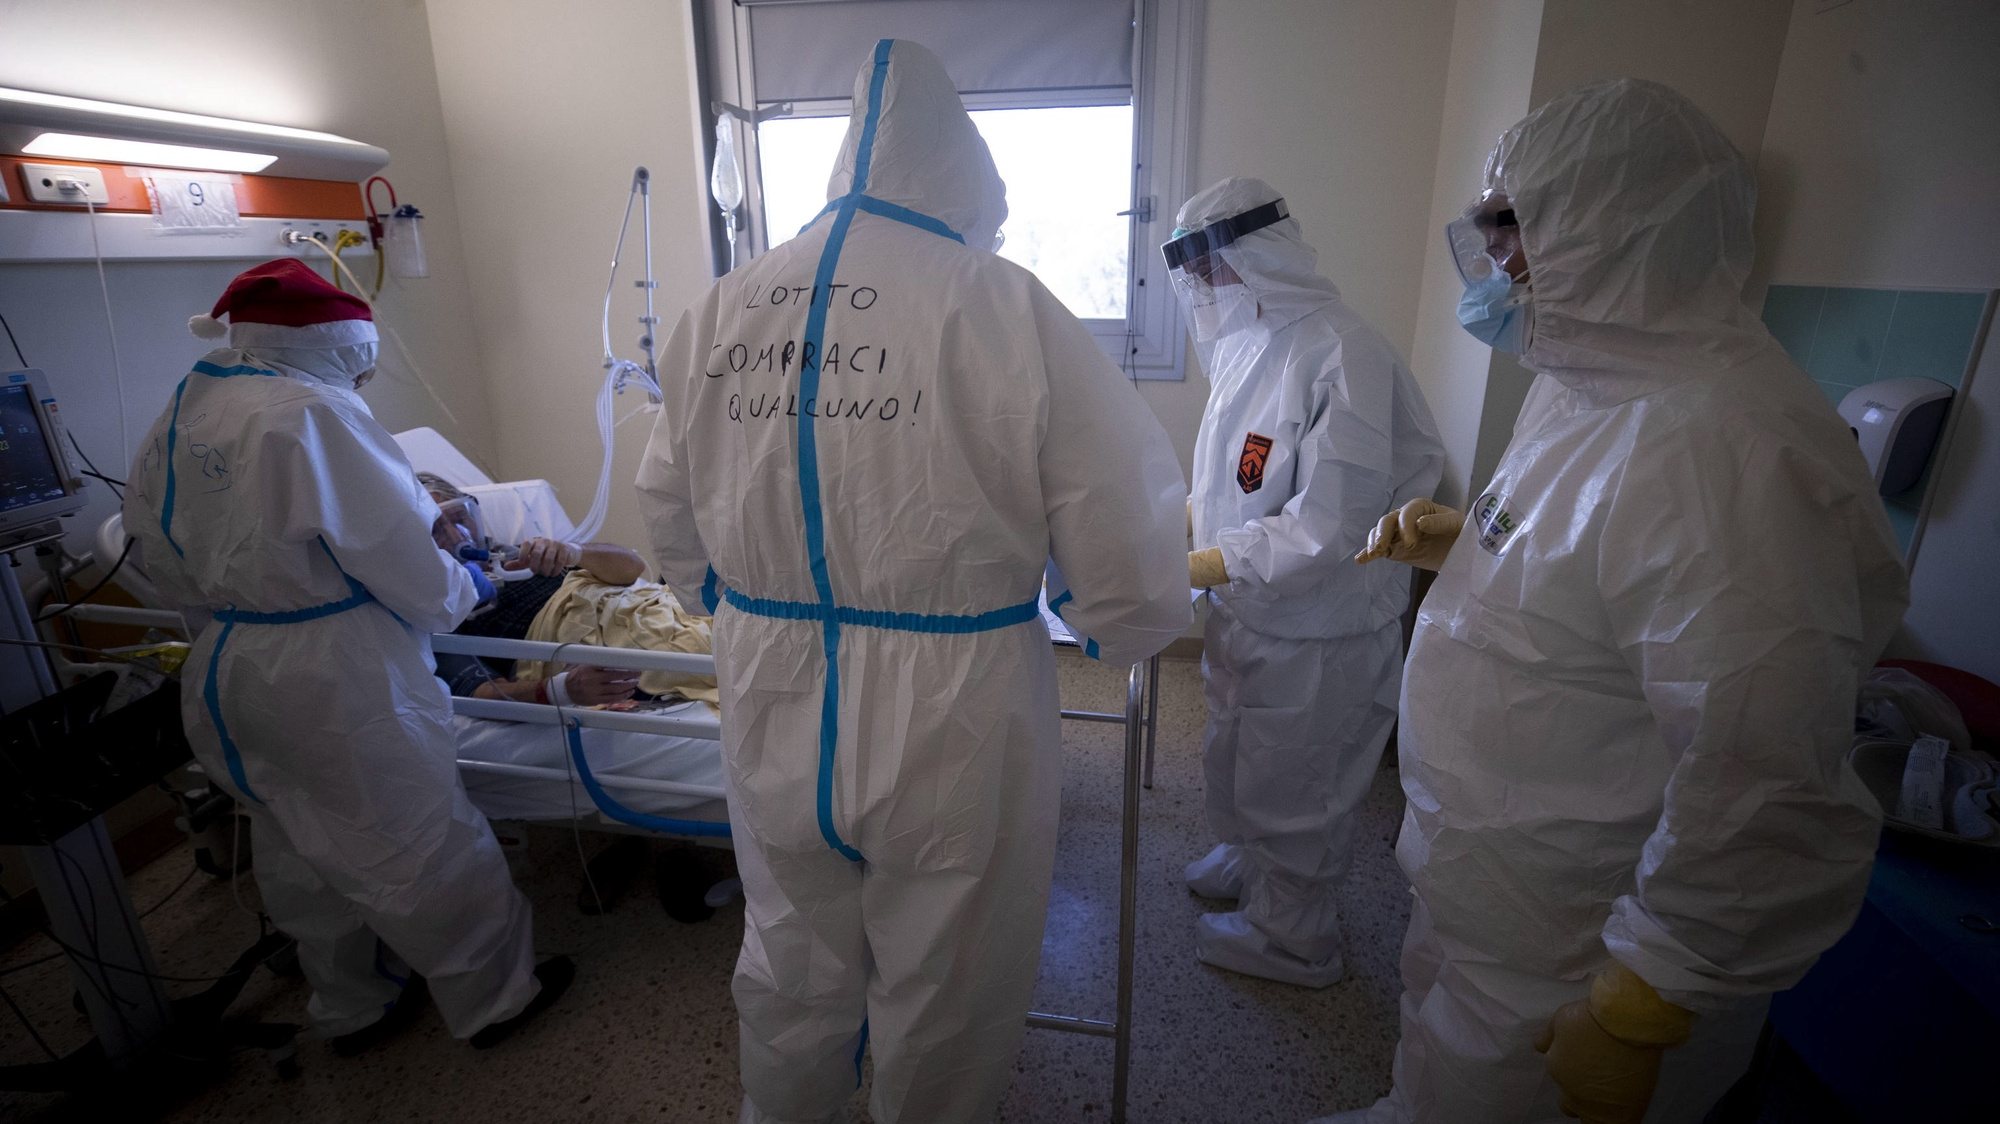 epa08918774 Healthcare workers in protective suits and masks work at the COVID-19 Emergency Ward of the San Filippo Neri Hospital during the ongoing coronavirus pandemic, in Rome, Italy, 04 January 2020. Italy on 27 December 2020 had begun with the vaccination of doctors, nurses, medical personnel and health workers with the Pfizer-BioNTech vaccine.  EPA/MASSIMO PERCOSSI